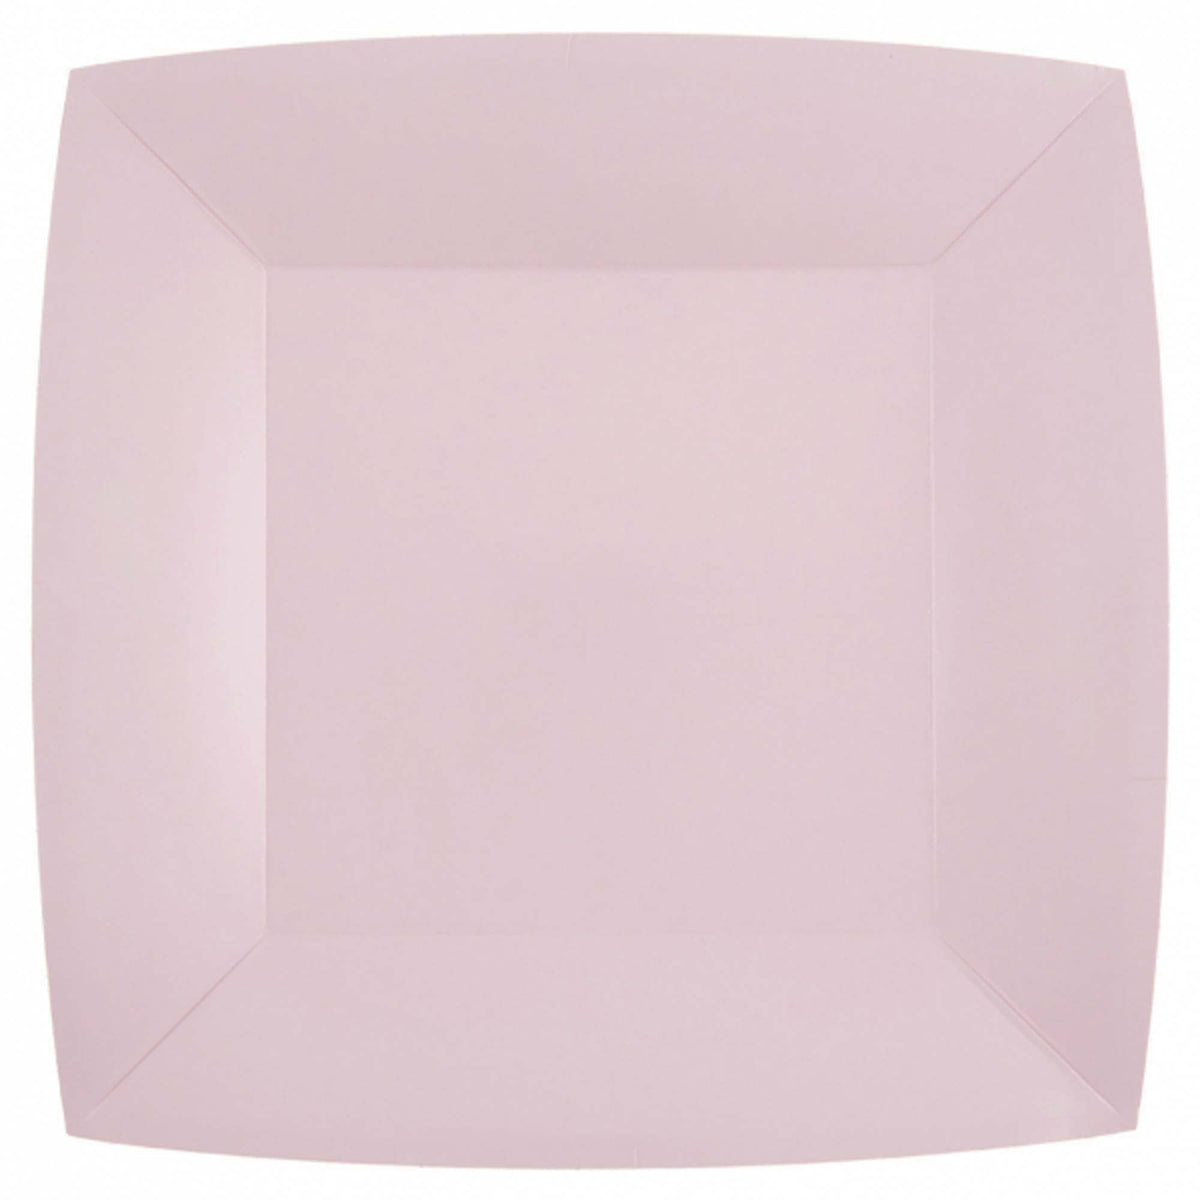 SANTEX Everyday Entertaining Light Pink Large Square Lunch Party Paper Plates, 9 Inches, 10 Count 3660380072409